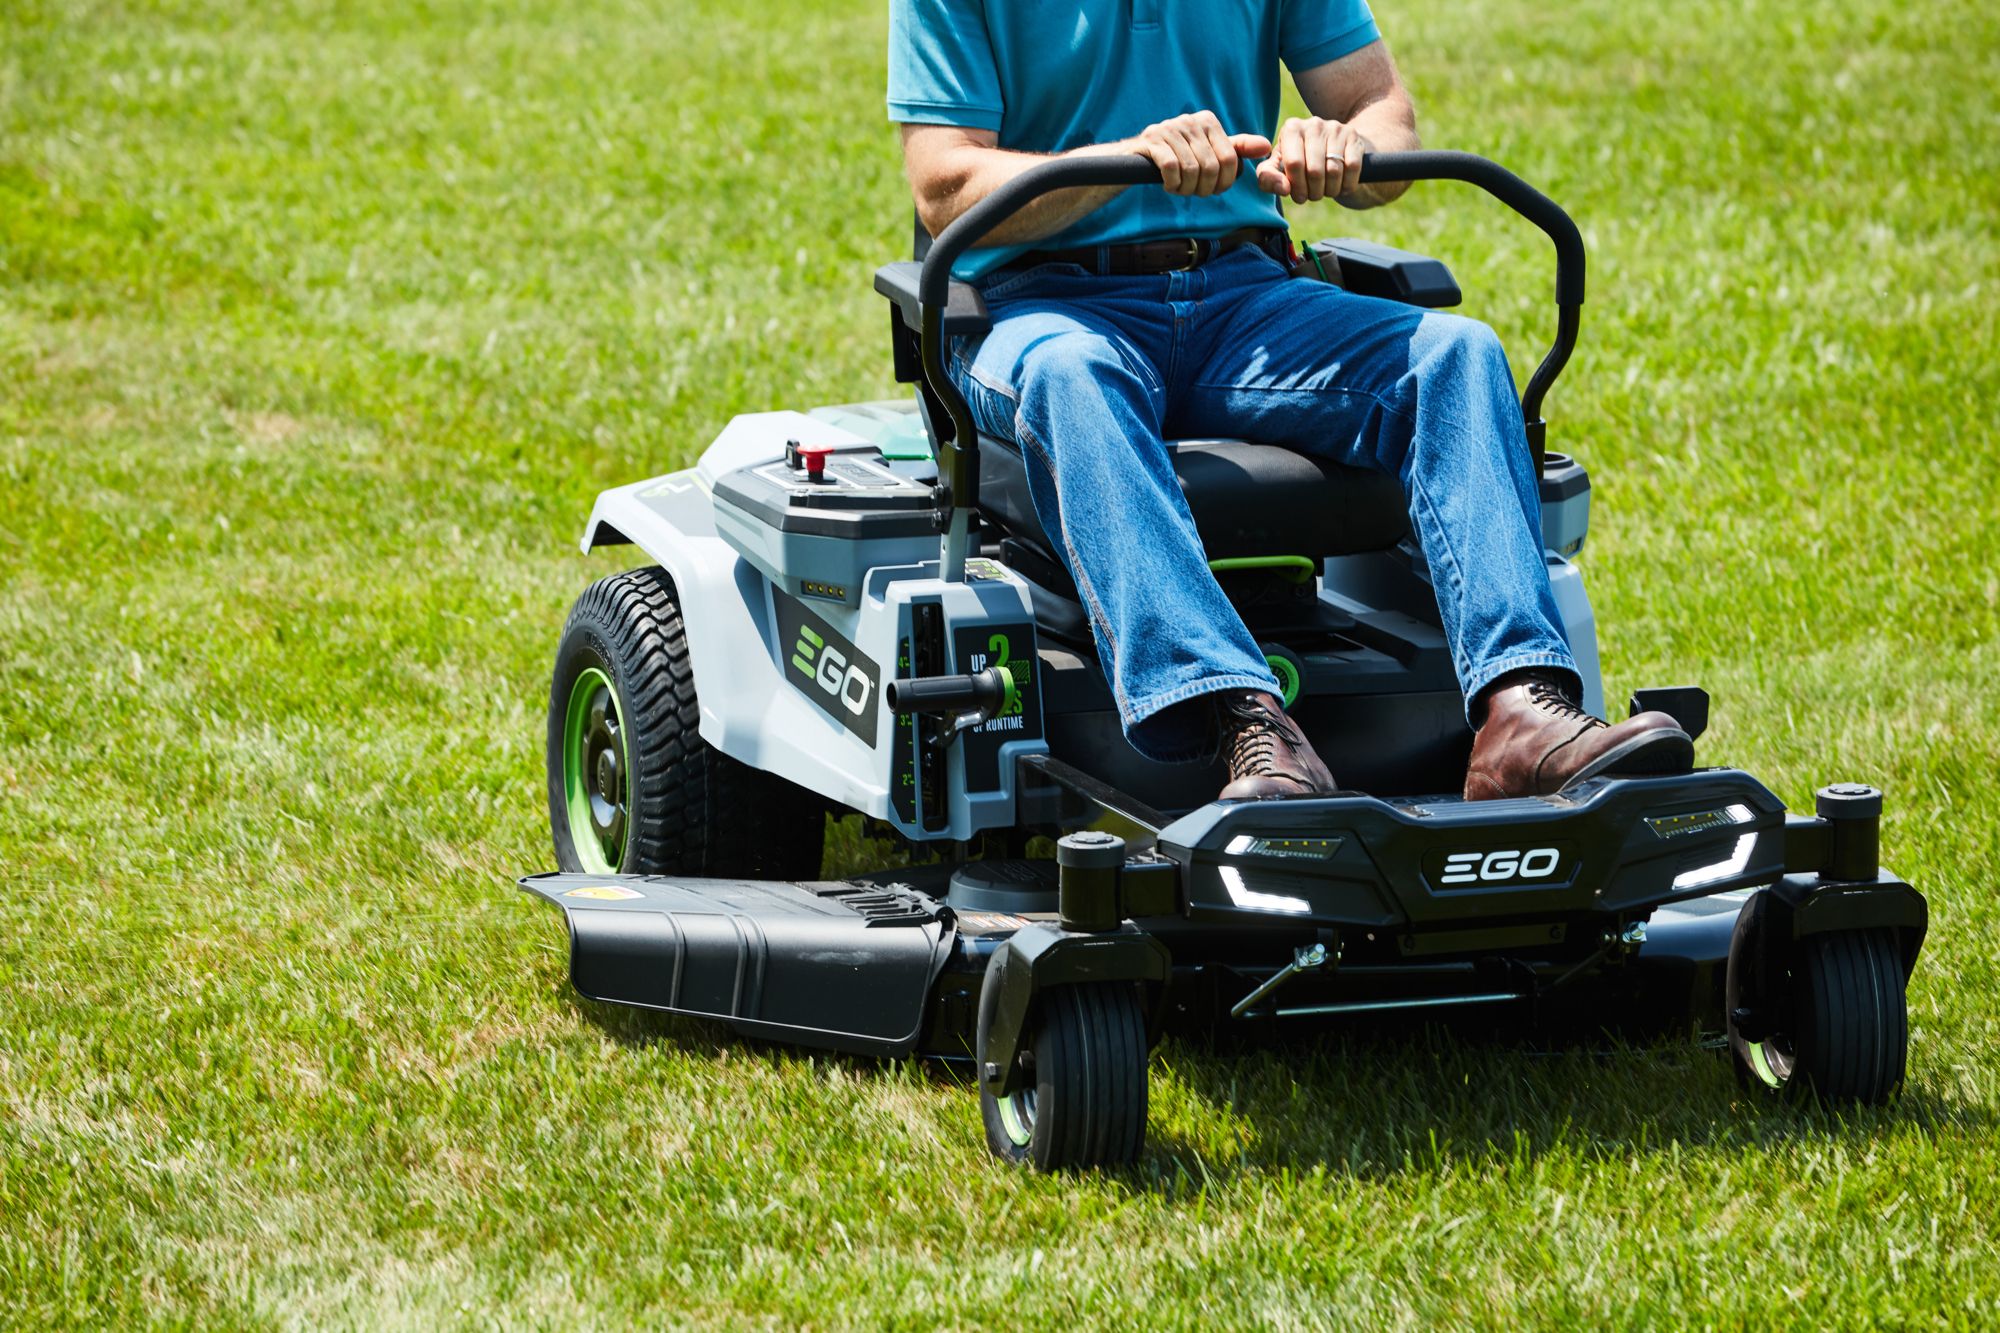 Manual Reel Lawn Mowers, Research and Compare